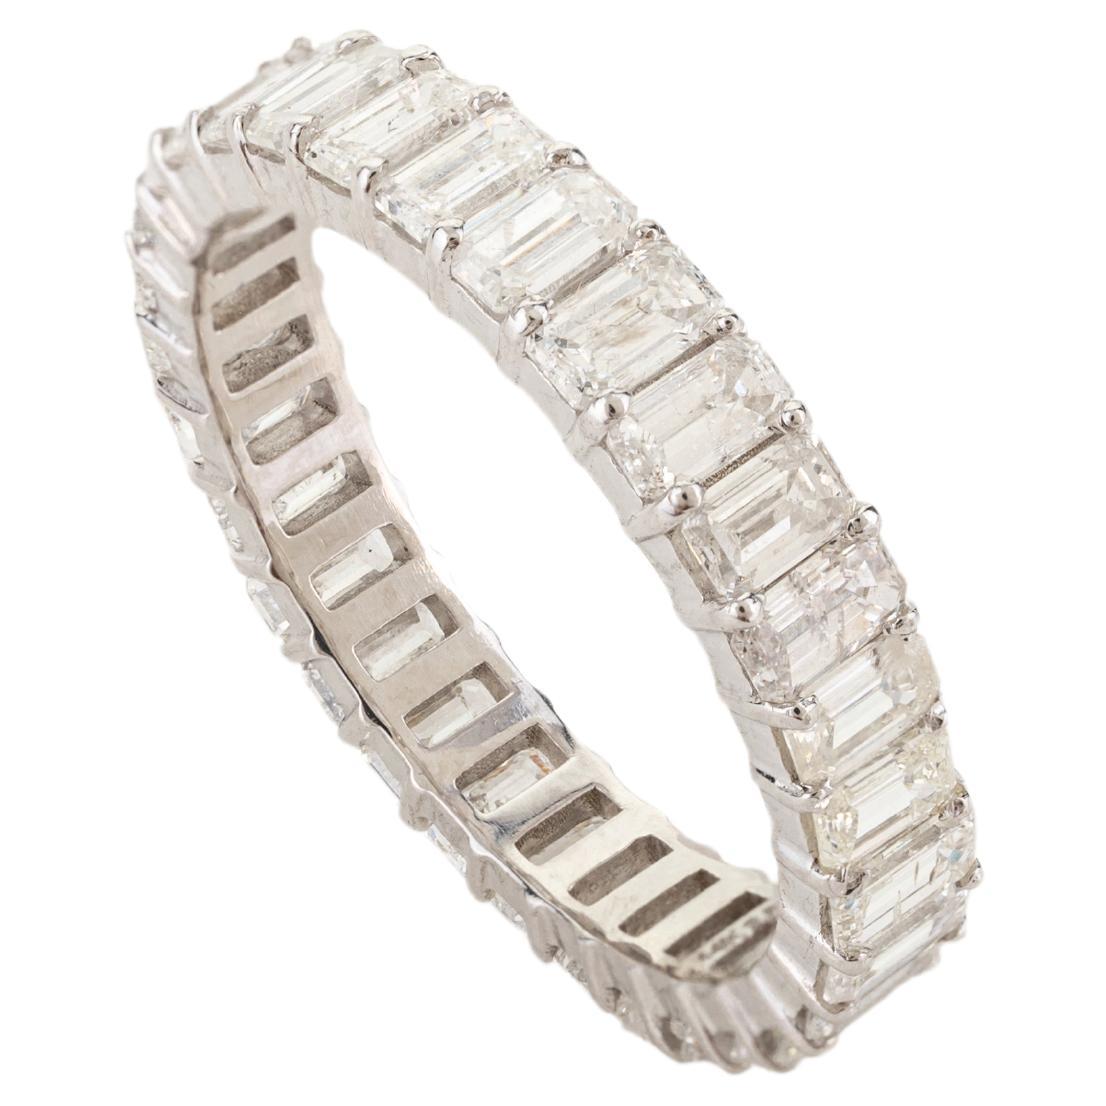 For Sale:  2.86 Carat Emerald Cut Diamond Eternity Band Ring in 14k Solid White Gold